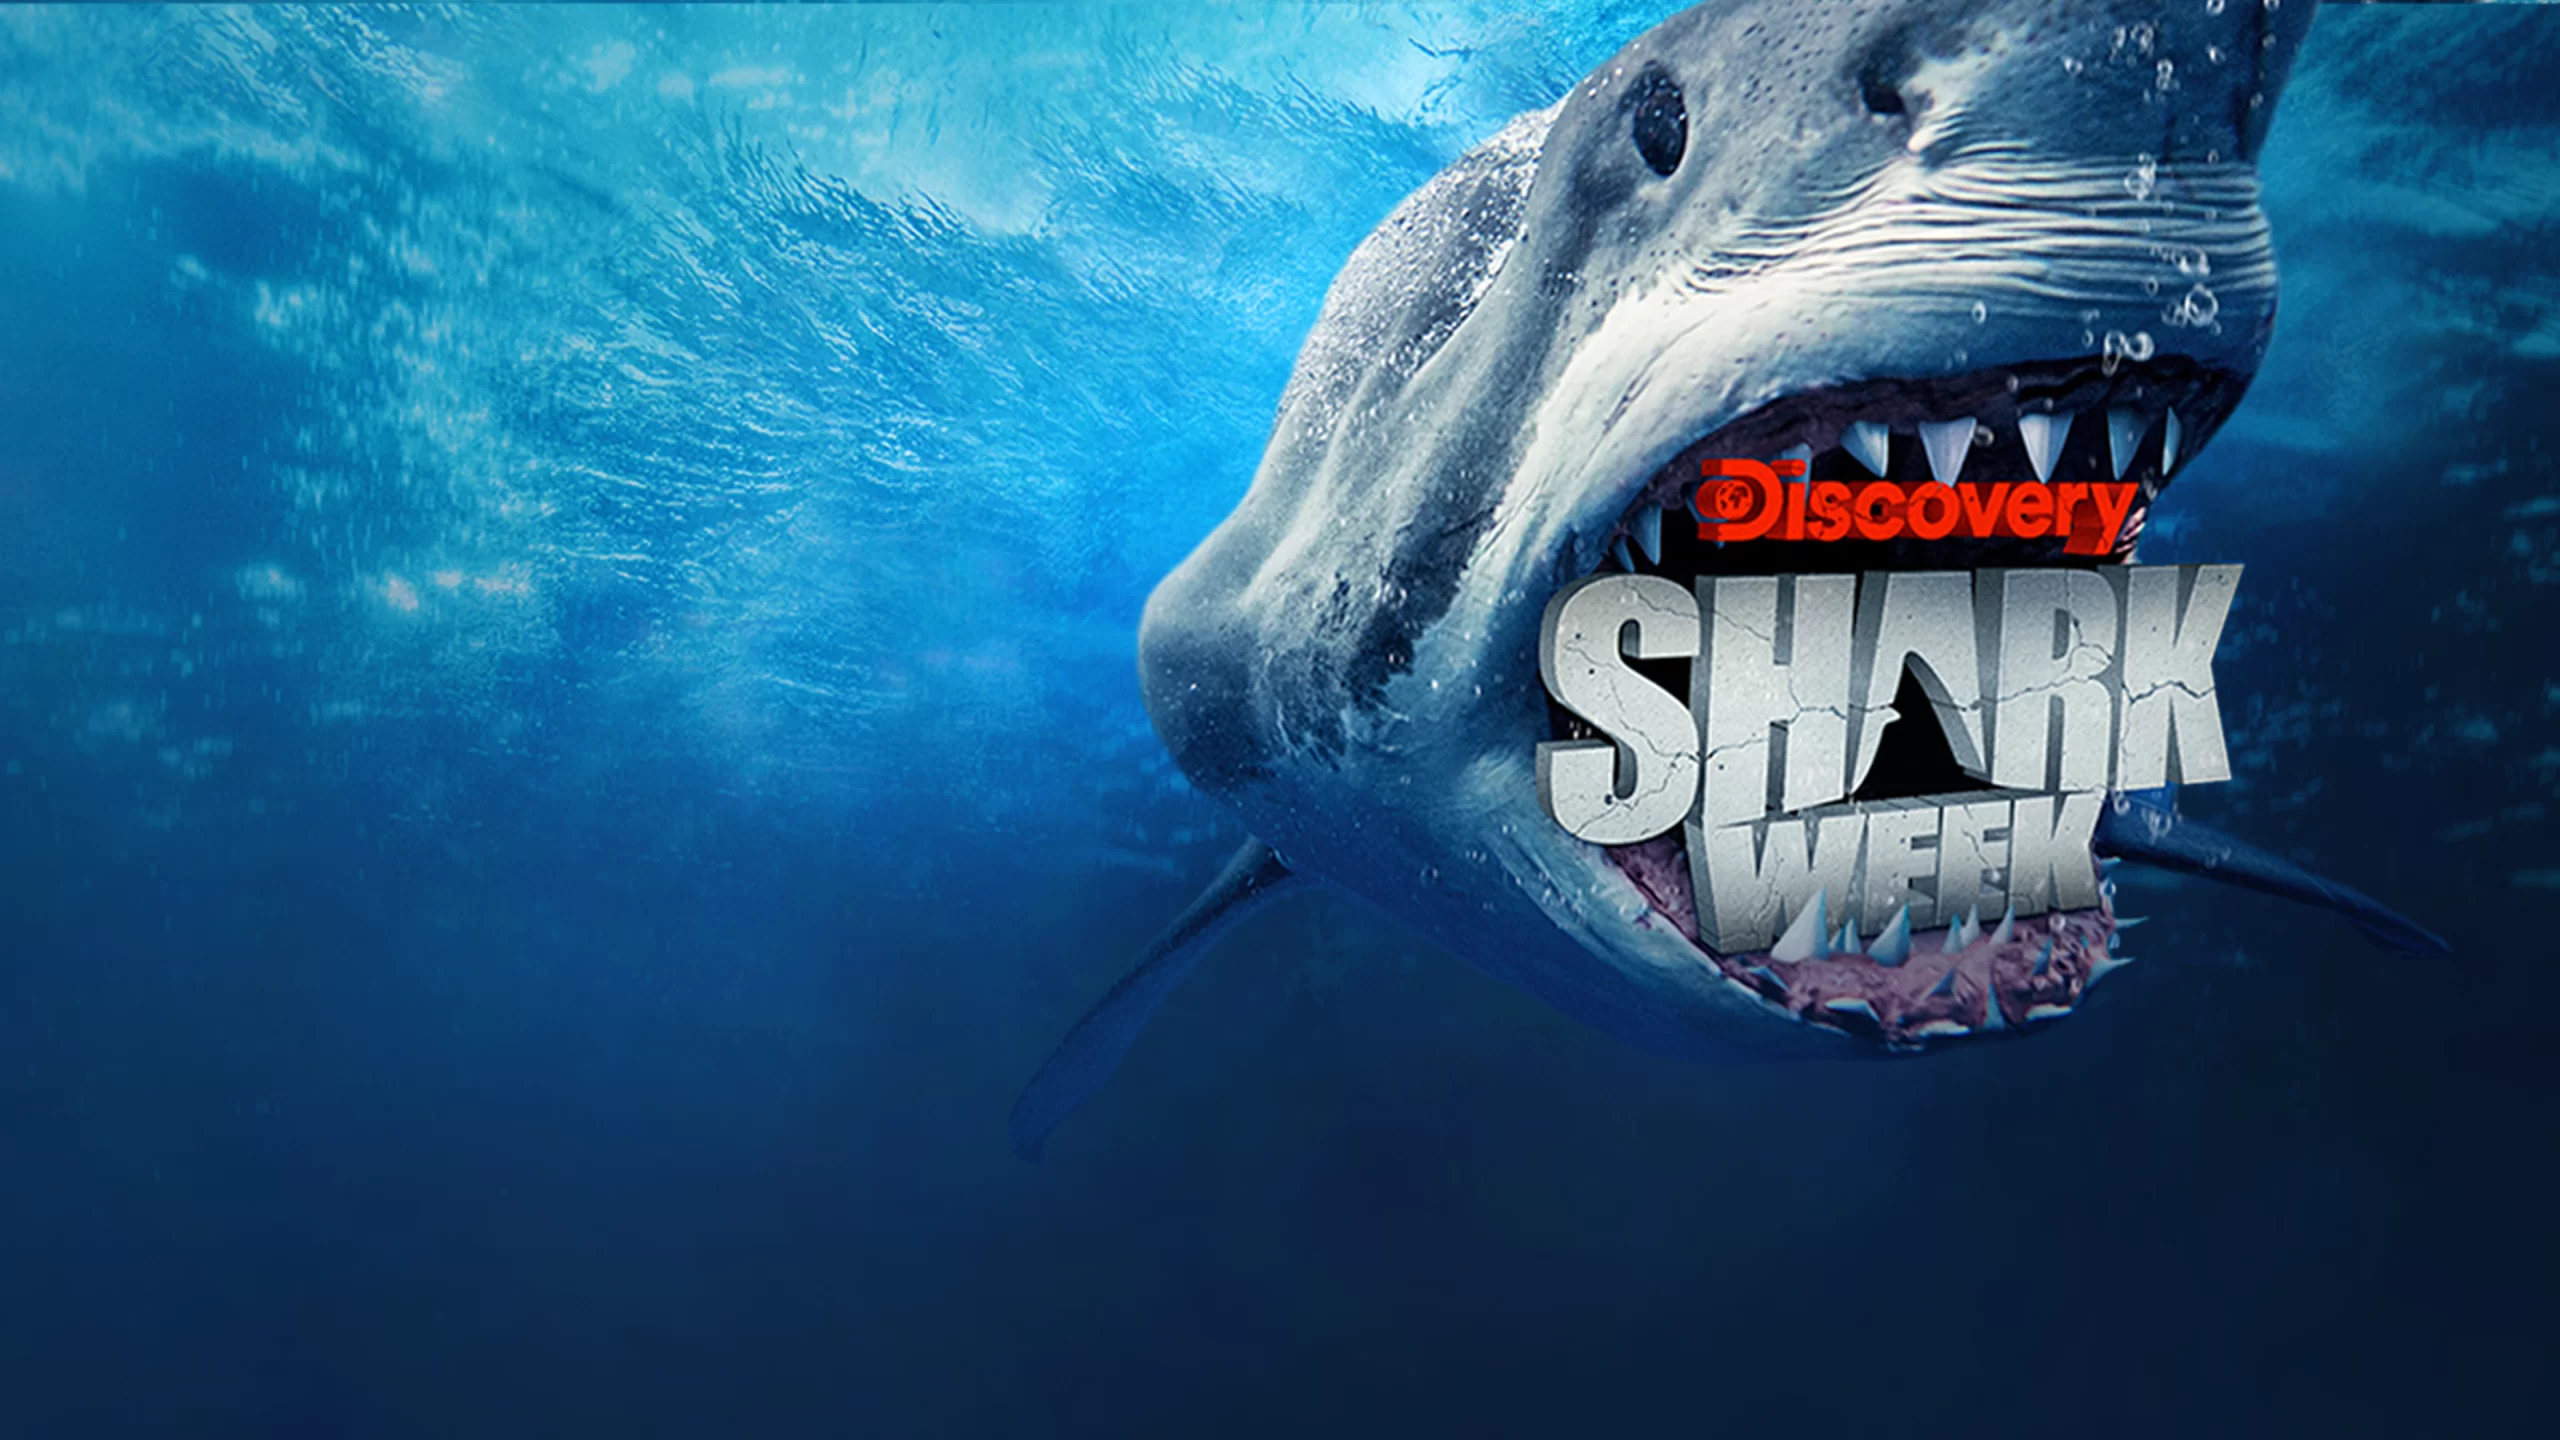 The Discovery Channel’s “Shark Week” Is Packed with Fake Science and False Information.